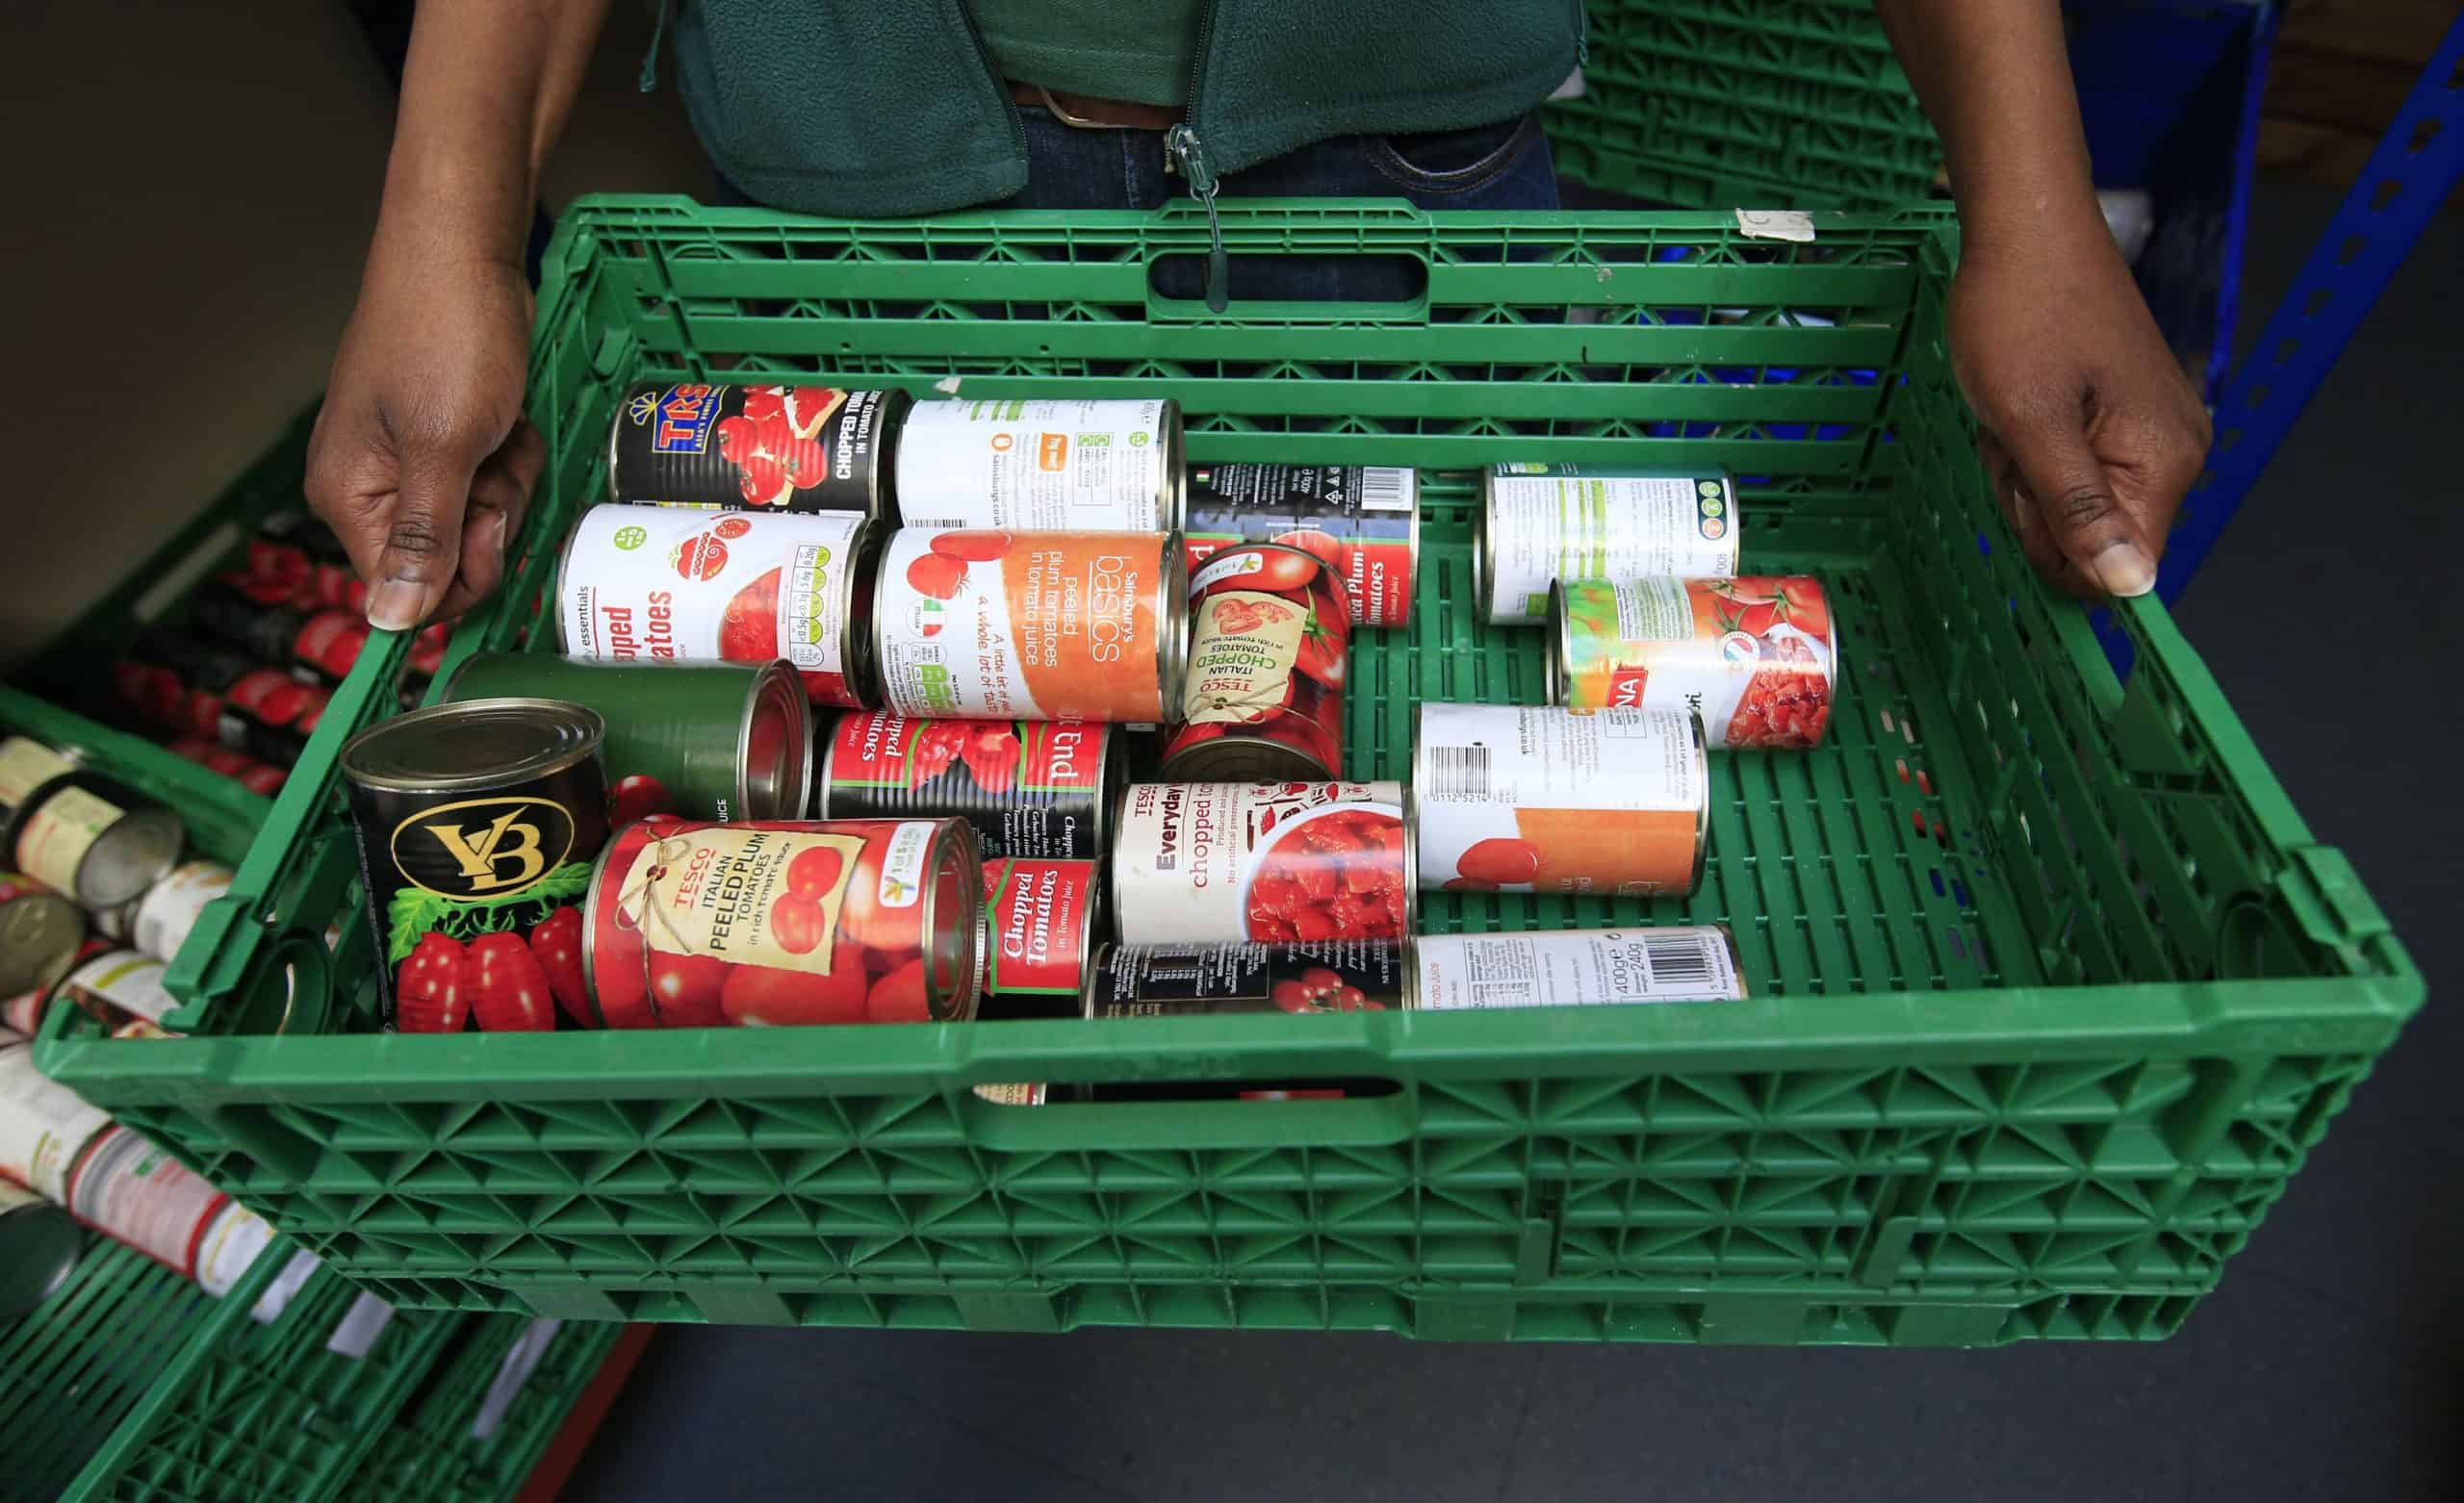 Food bank use ‘well above’ pre-pandemic level, Trussell Trust says